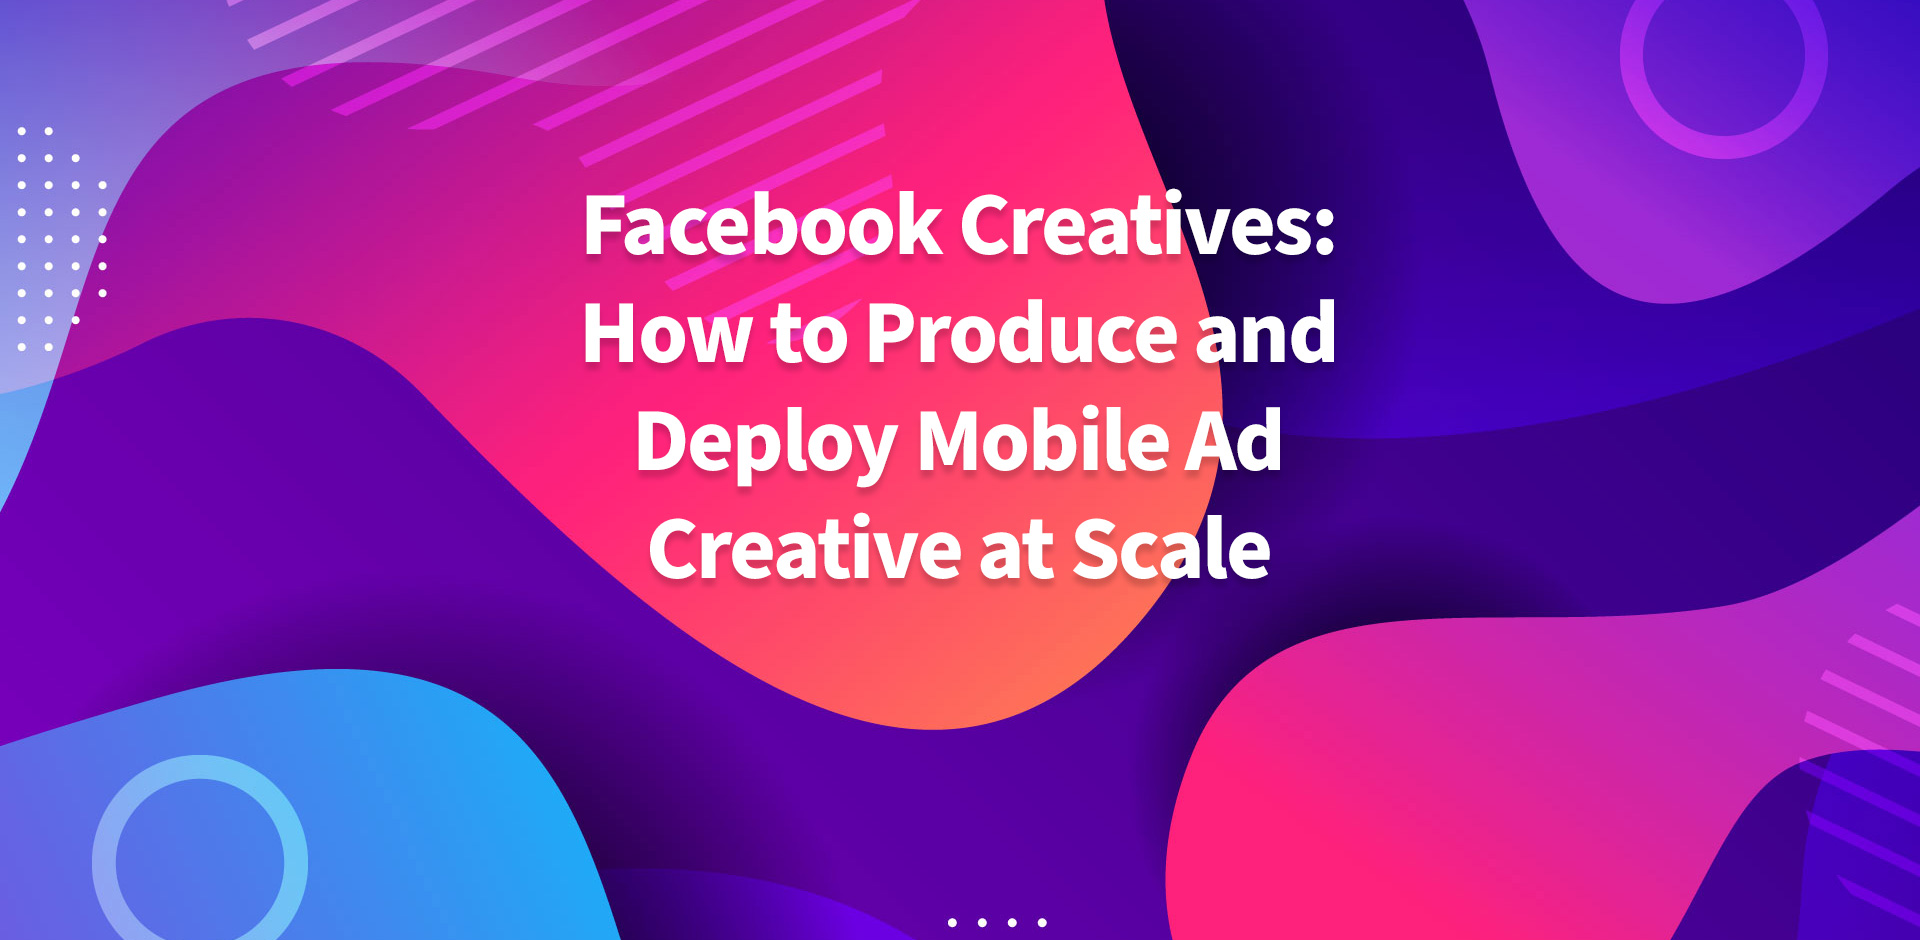 Facebook Creatives: How to Produce and Deploy Mobile Ad Creative at Scale